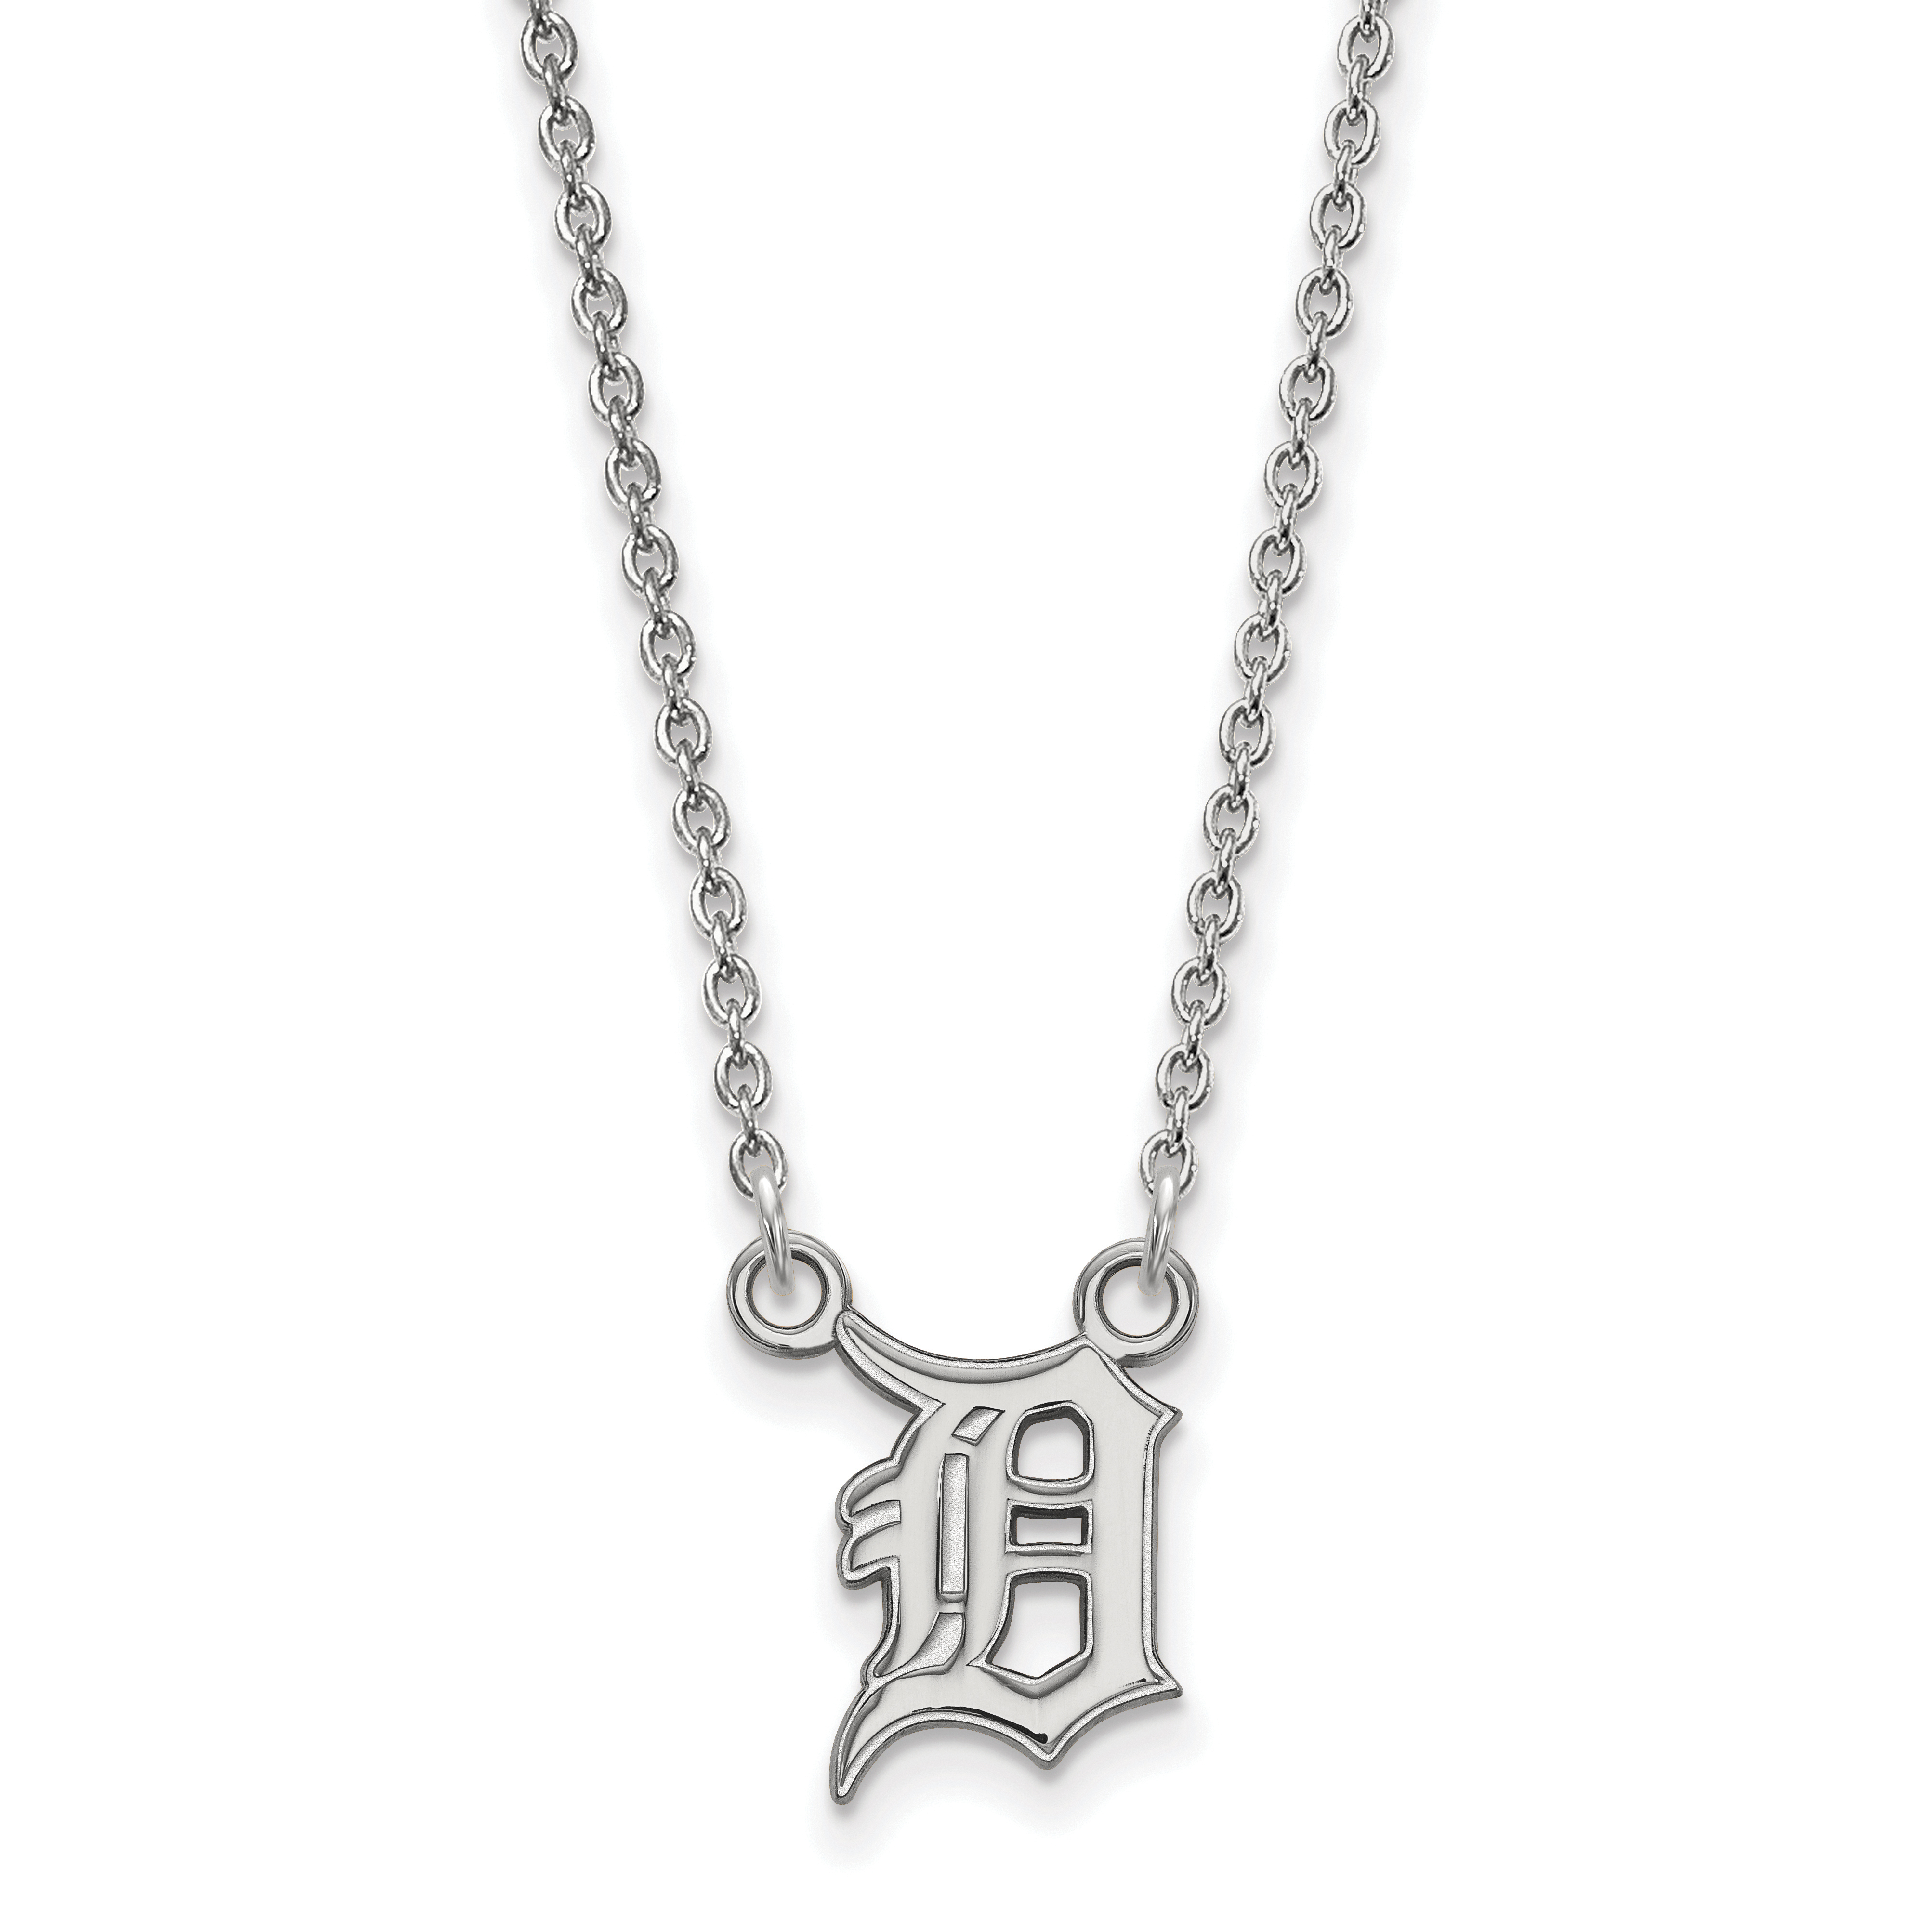 Initial Capital D Charm Pendant Chain Necklace Spring Clasp 925 Sterling  Silver Handmade Jewelry at Rs 762.36/piece in Jaipur